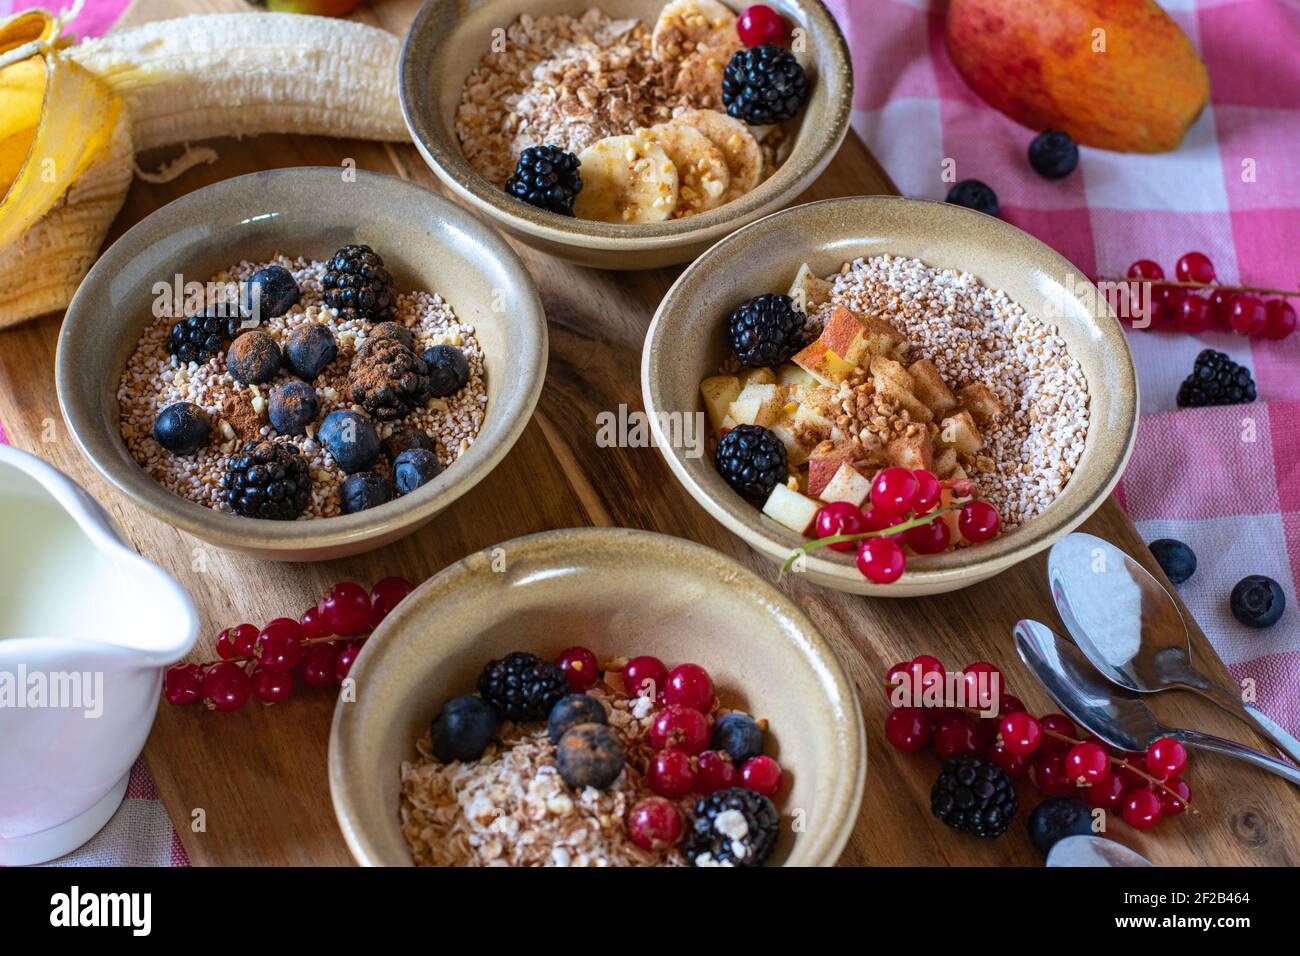 Still life of Family breakfast with oatmeal, granola, cereal and muesli topped with fruits and nuts and served in rustic bowls Stock Photo